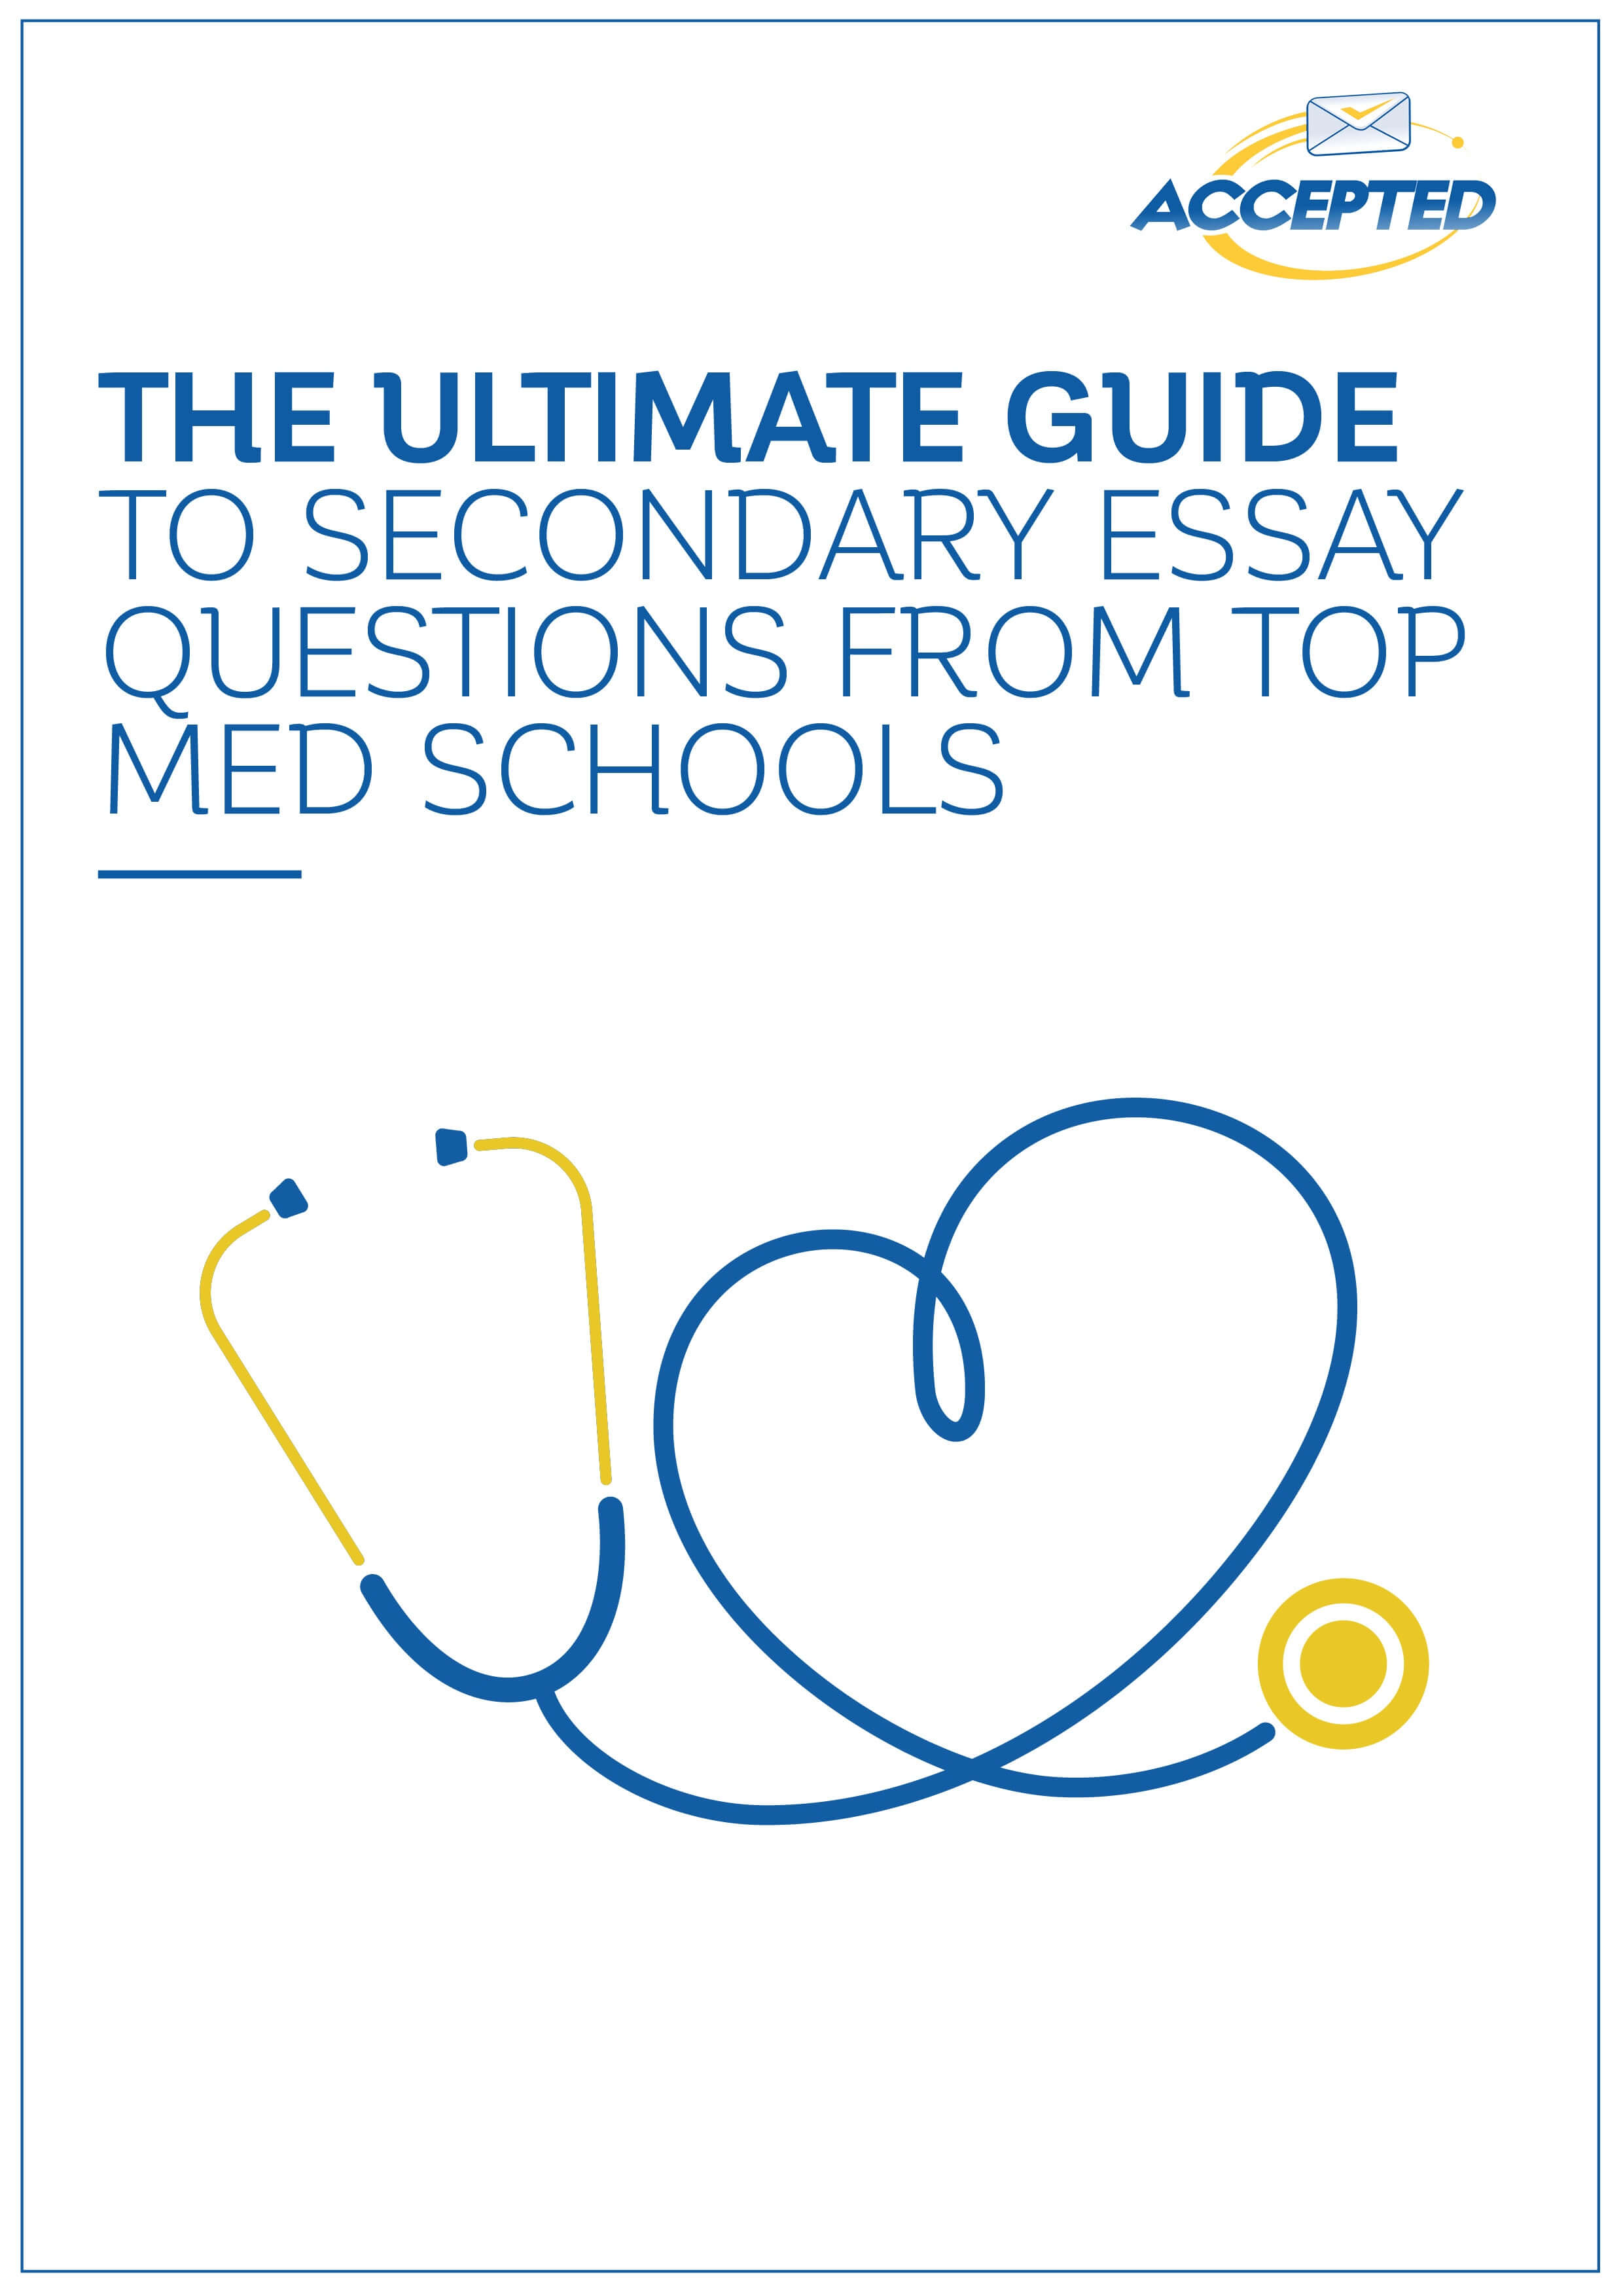 The Ultimate Guide to Secondary Essays from Top Medical Schools